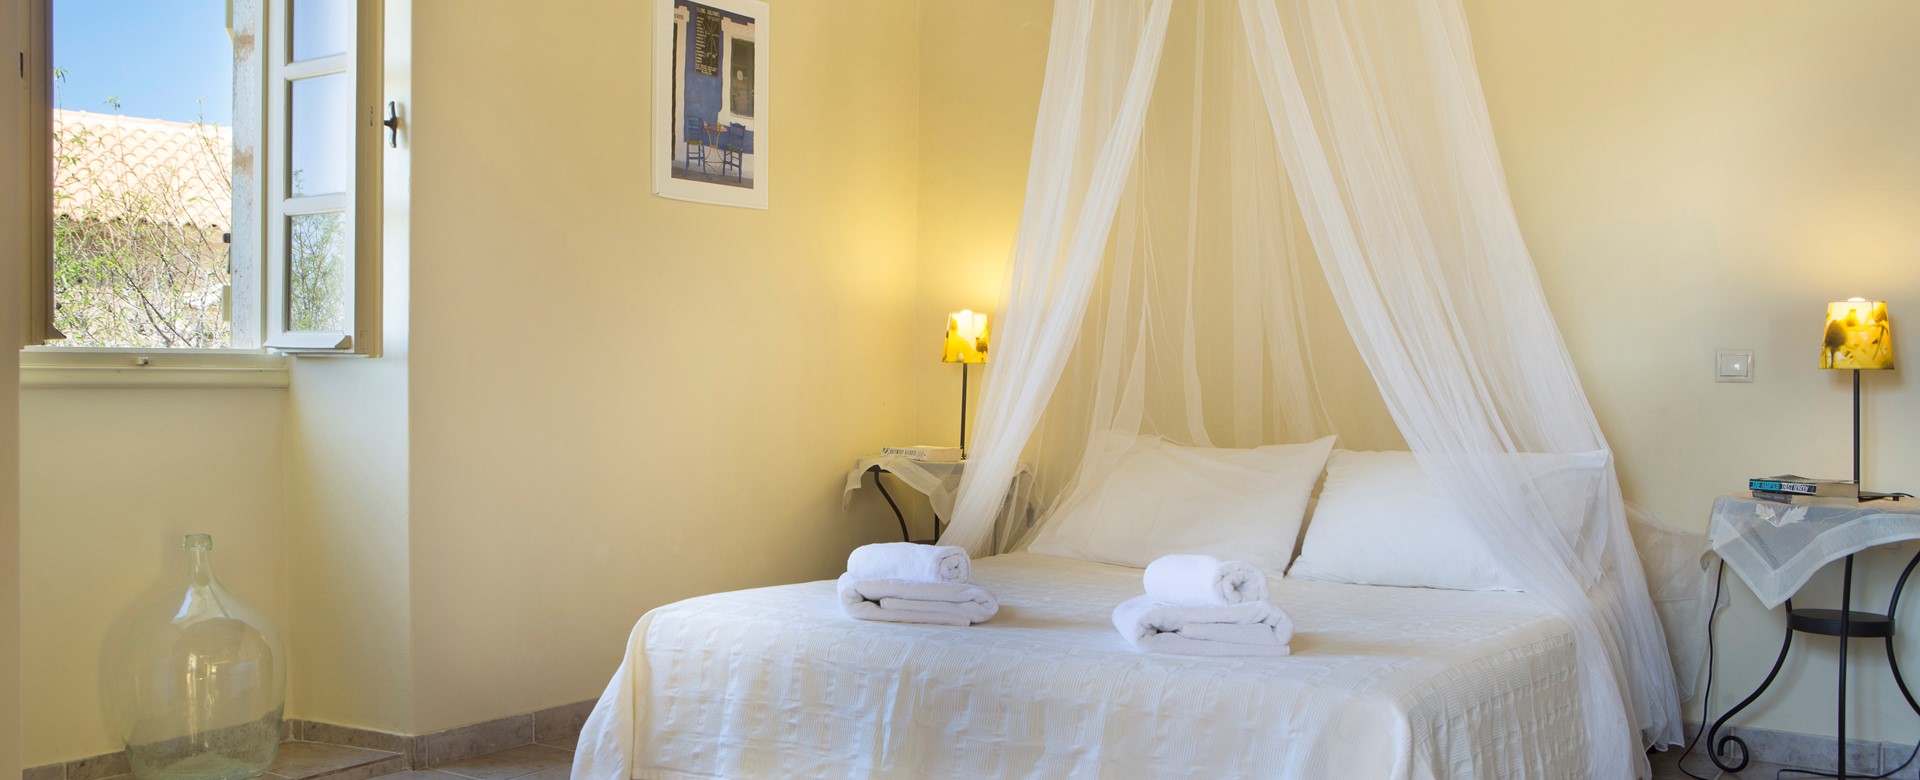 Master bedroom with king sized double bed perfect for a romantic holiday inside Lemoni Cottage, Fiscardo, Kefalonia